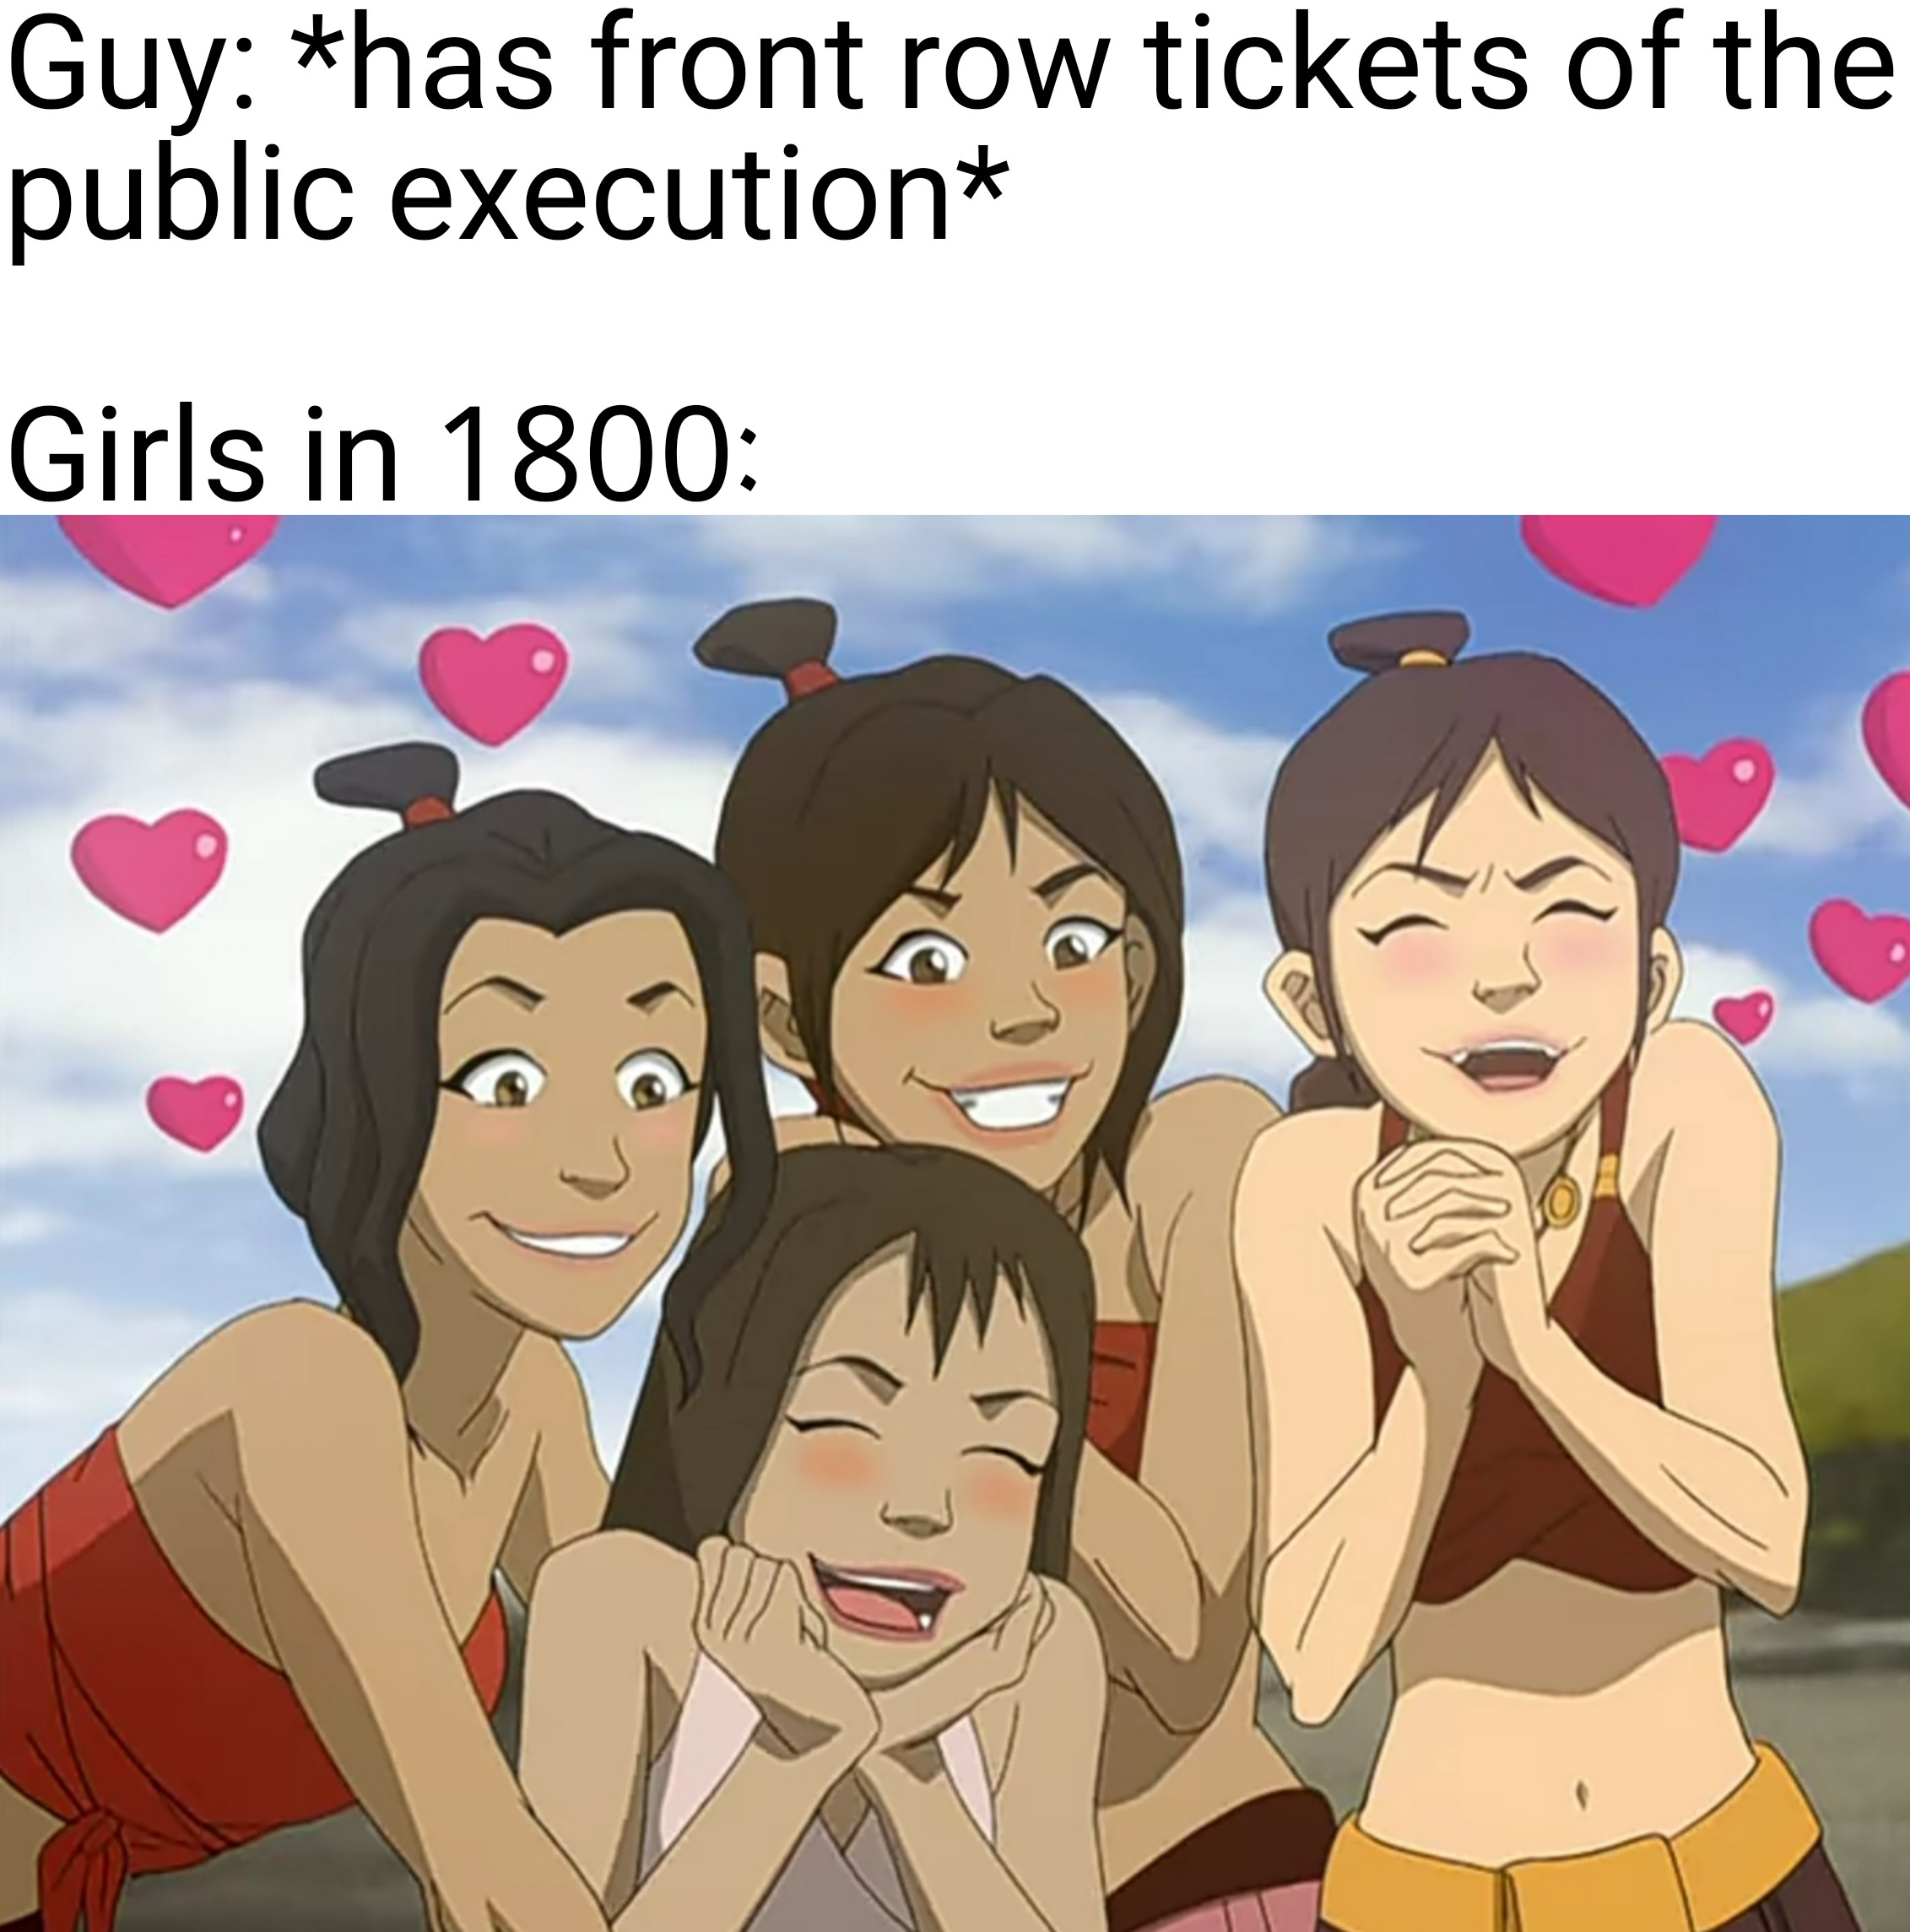 avatar fangirls - Guy has front row tickets of the public execution Girls in 1800